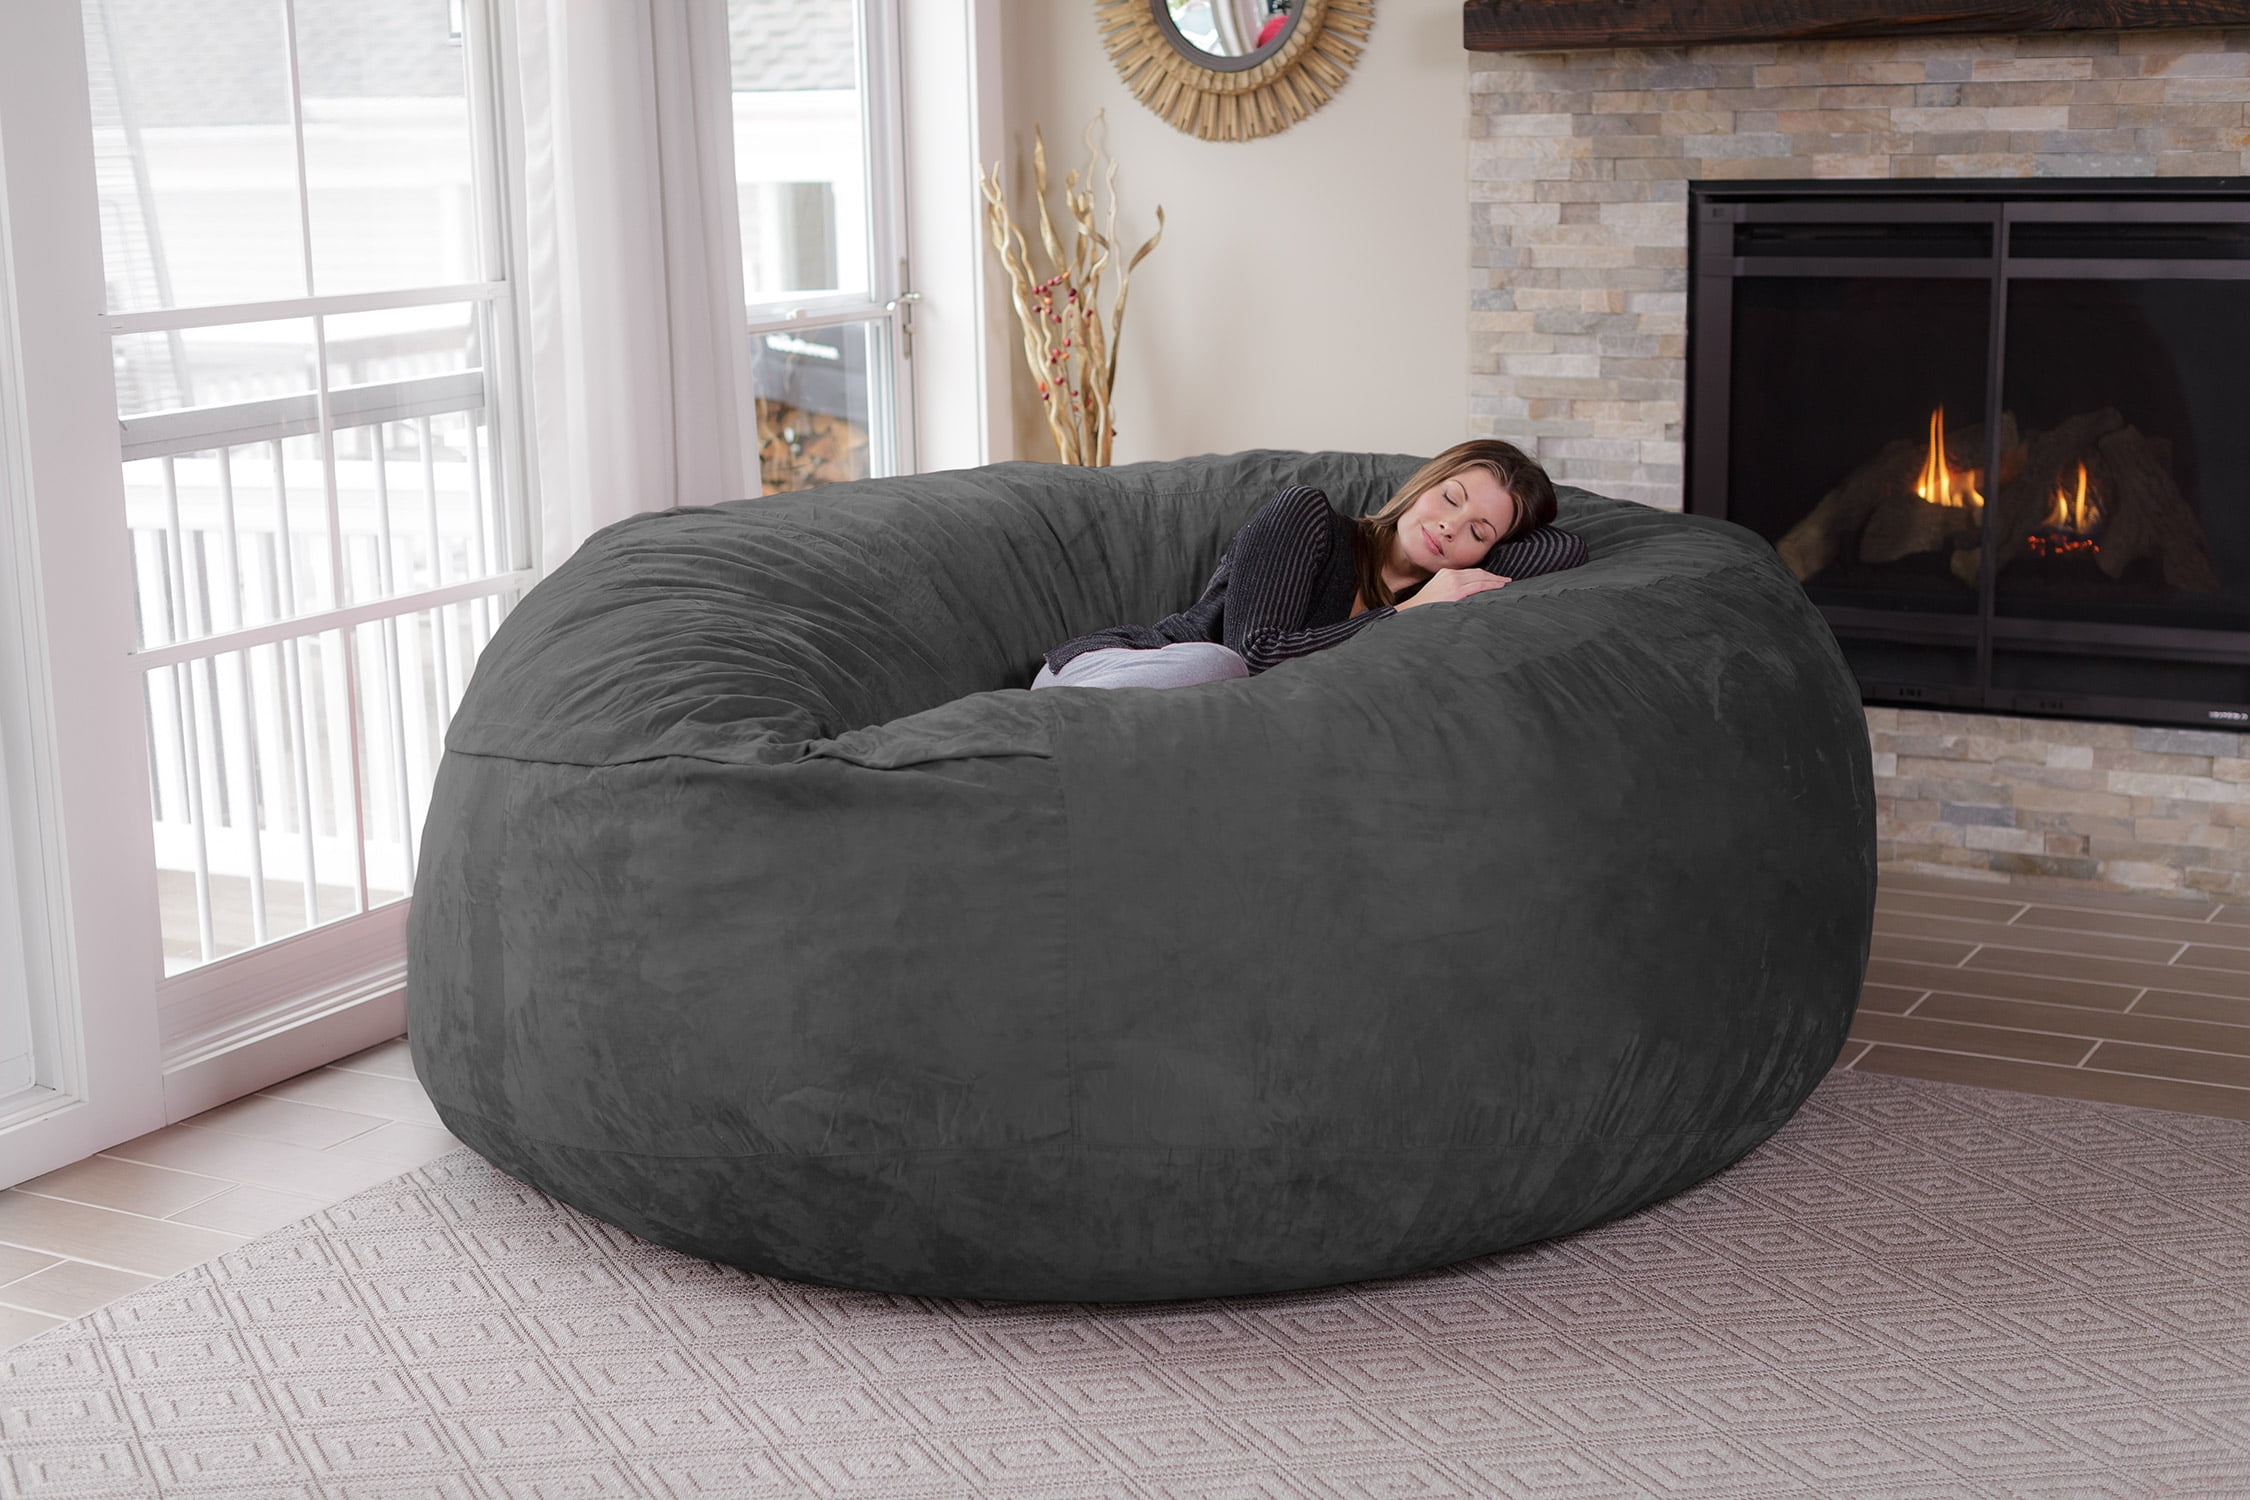 A Bean Bag Bed With Built-in Blanket and Pillow | Home Design, Garden &  Architecture Blog Magazine